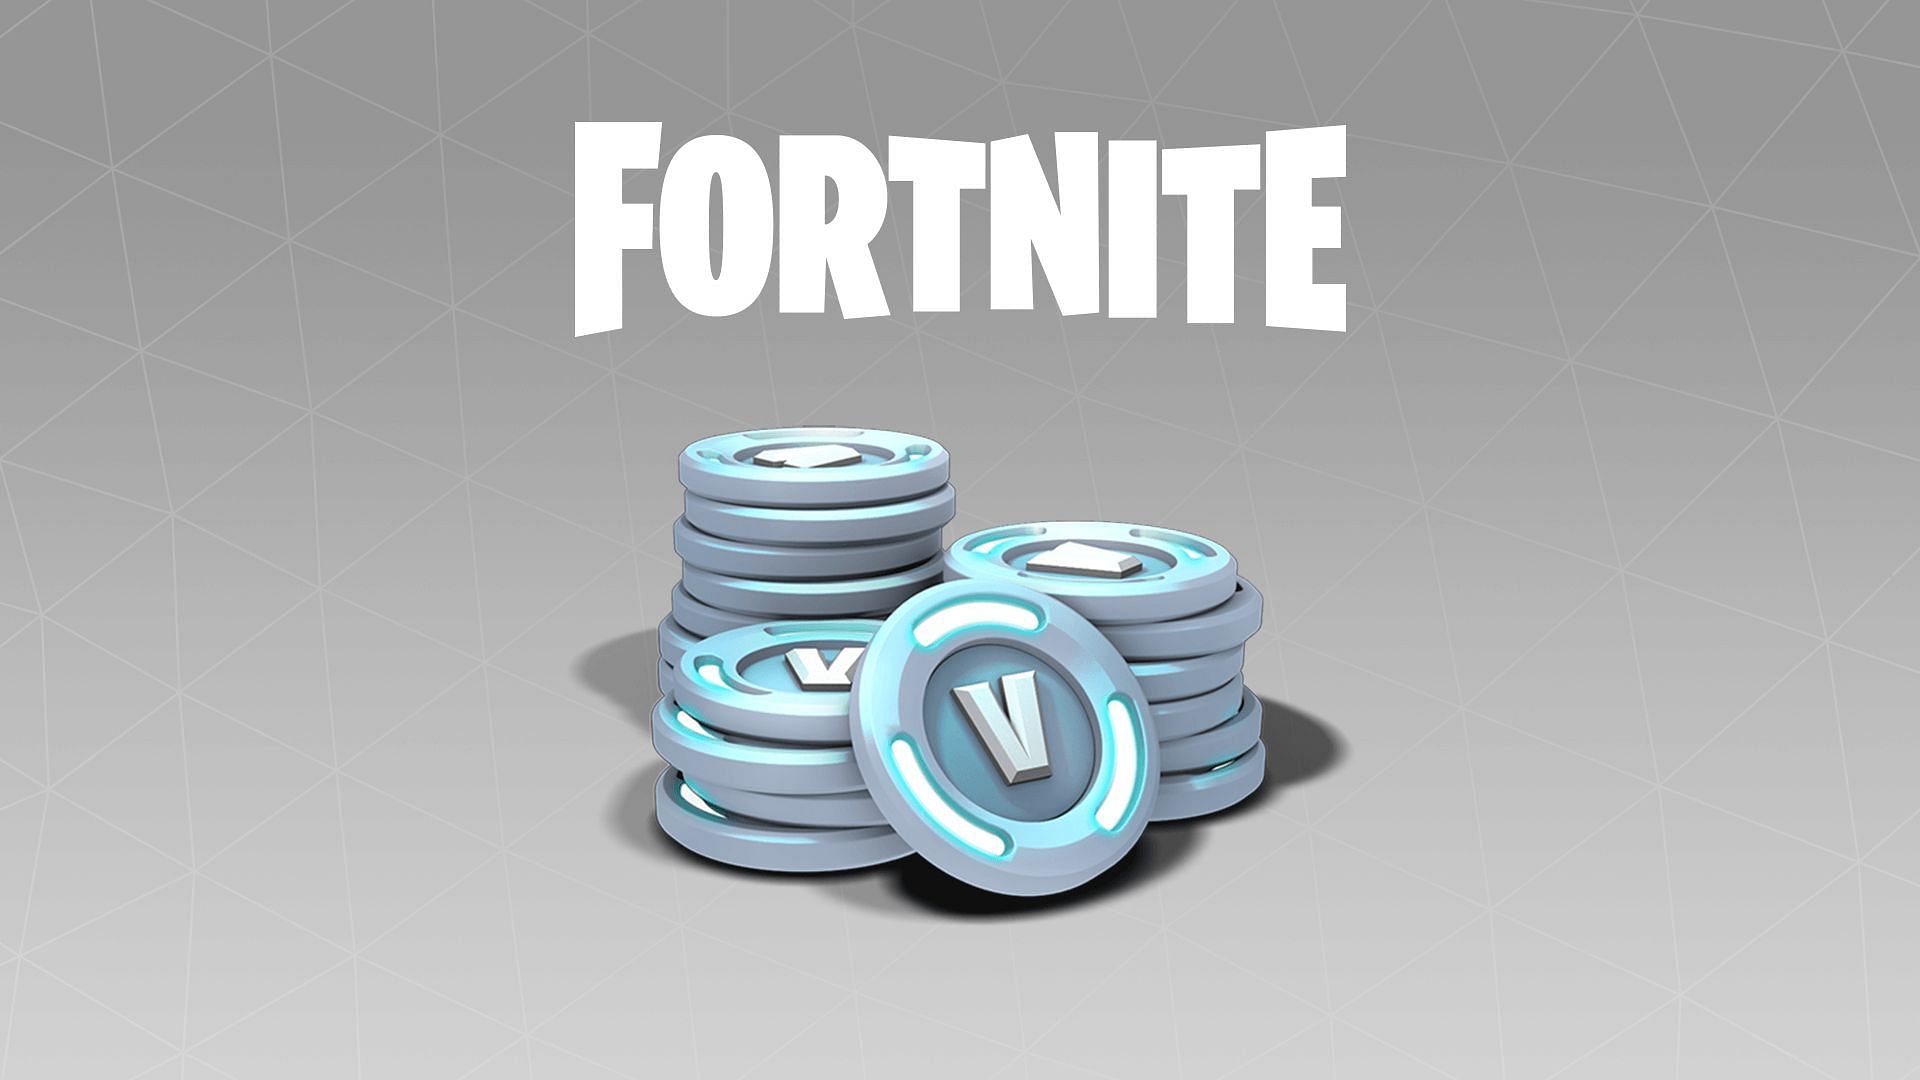 You can get a handful of V-Bucks for free in Fortnite (Image via Epic Games)